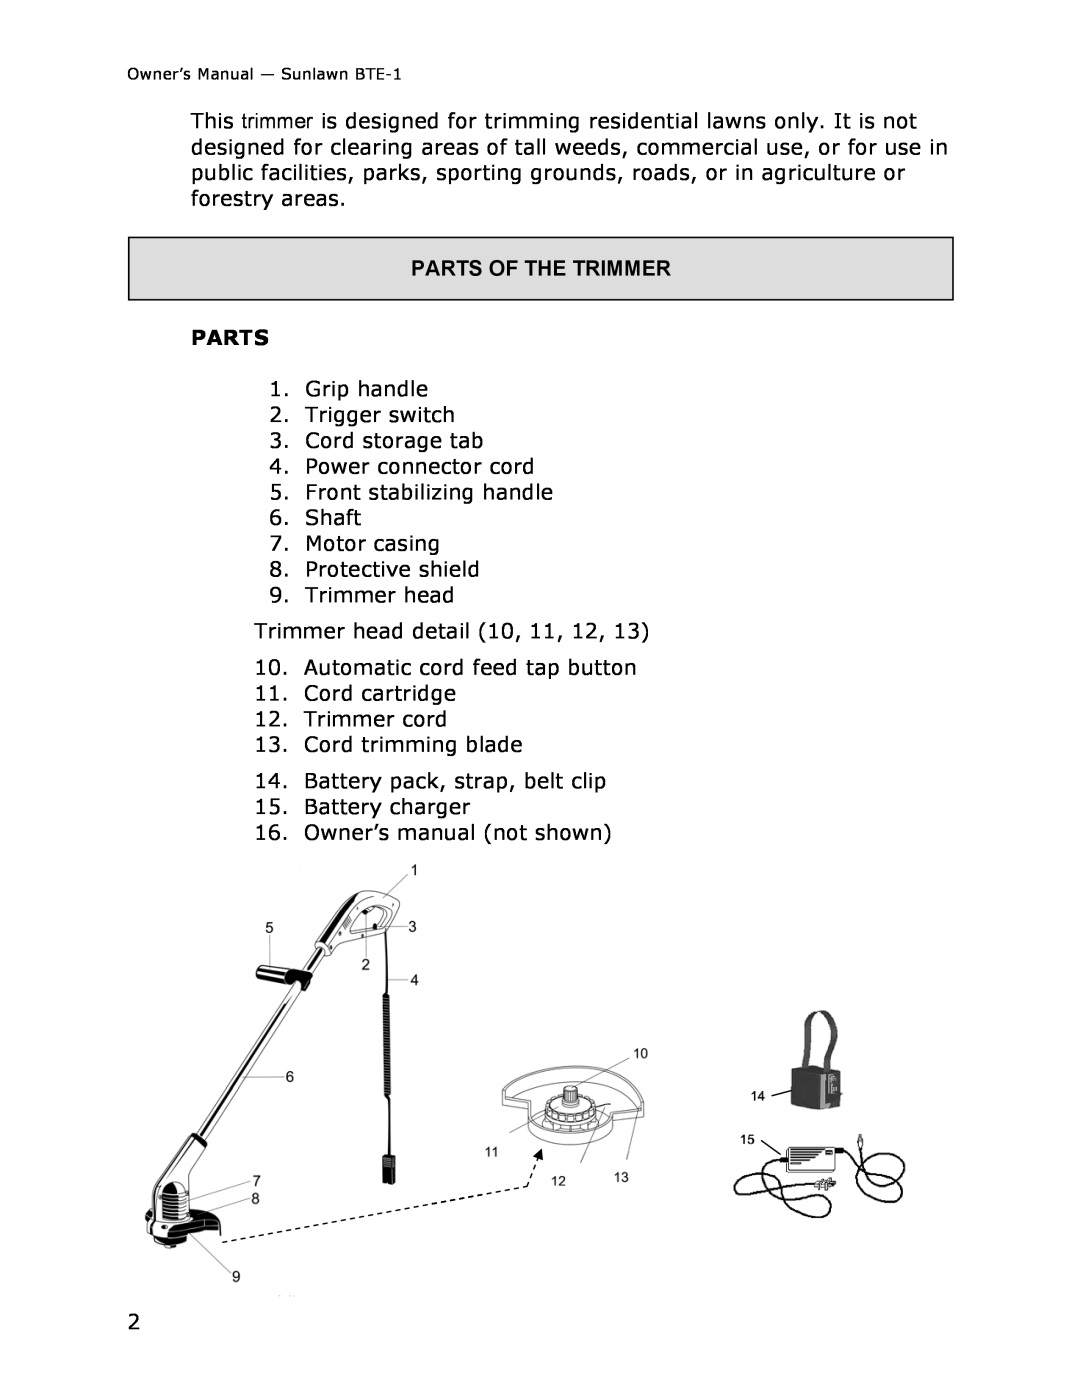 Sun Lawn BTE-1 owner manual Parts Of The Trimmer 